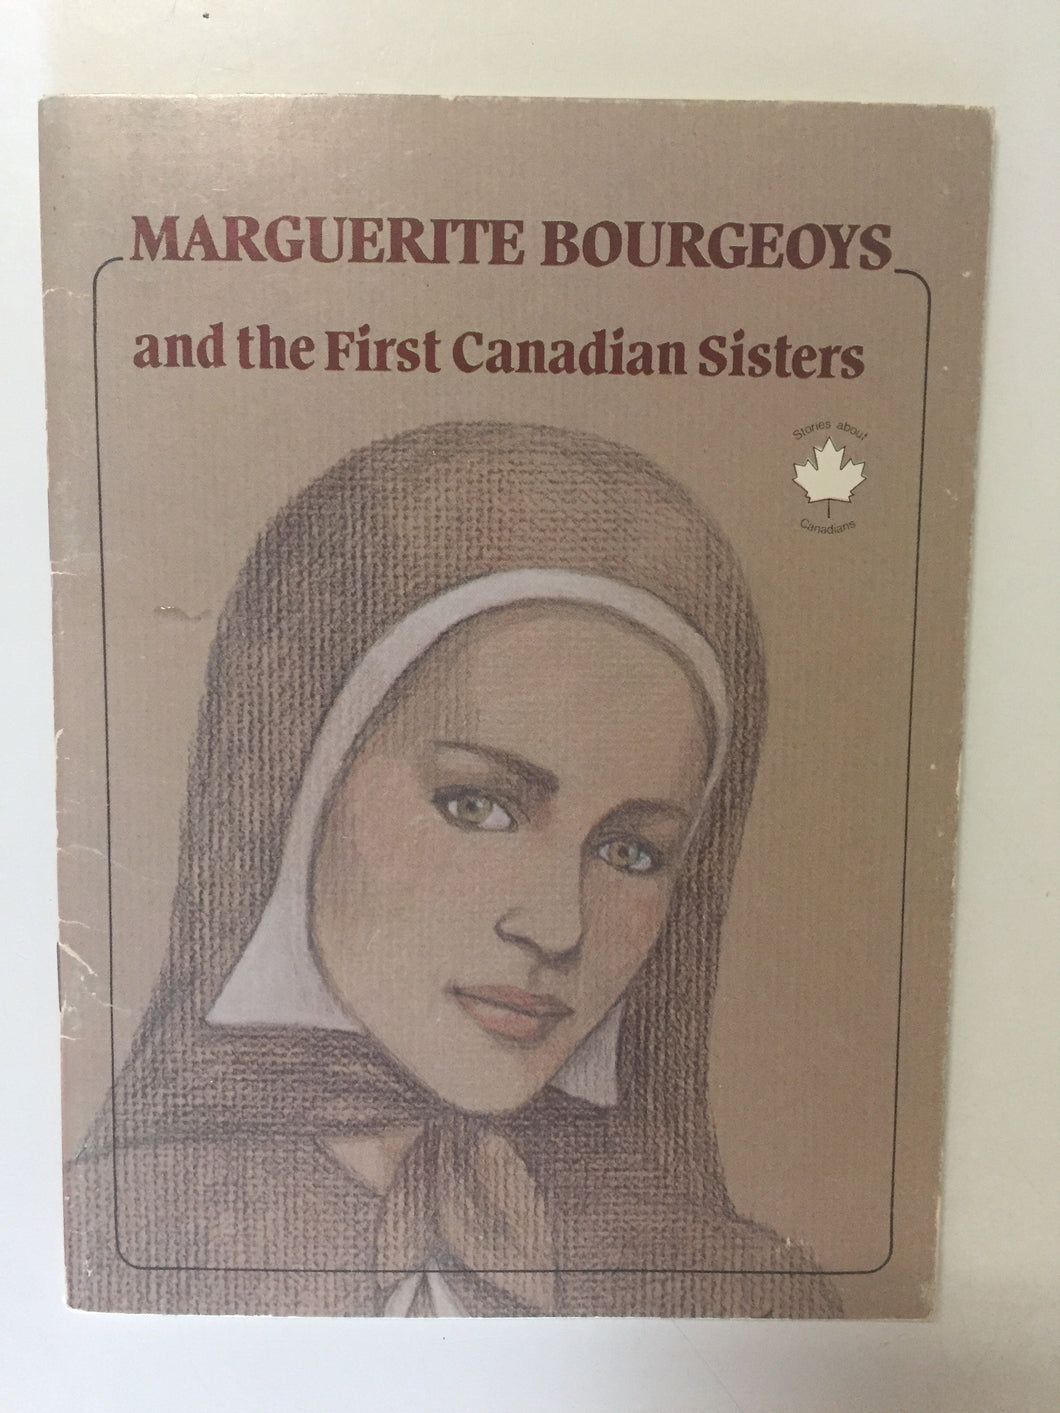 Marguerite Bourgeoys and the First Canadian Sisters - Slick Cat Books 